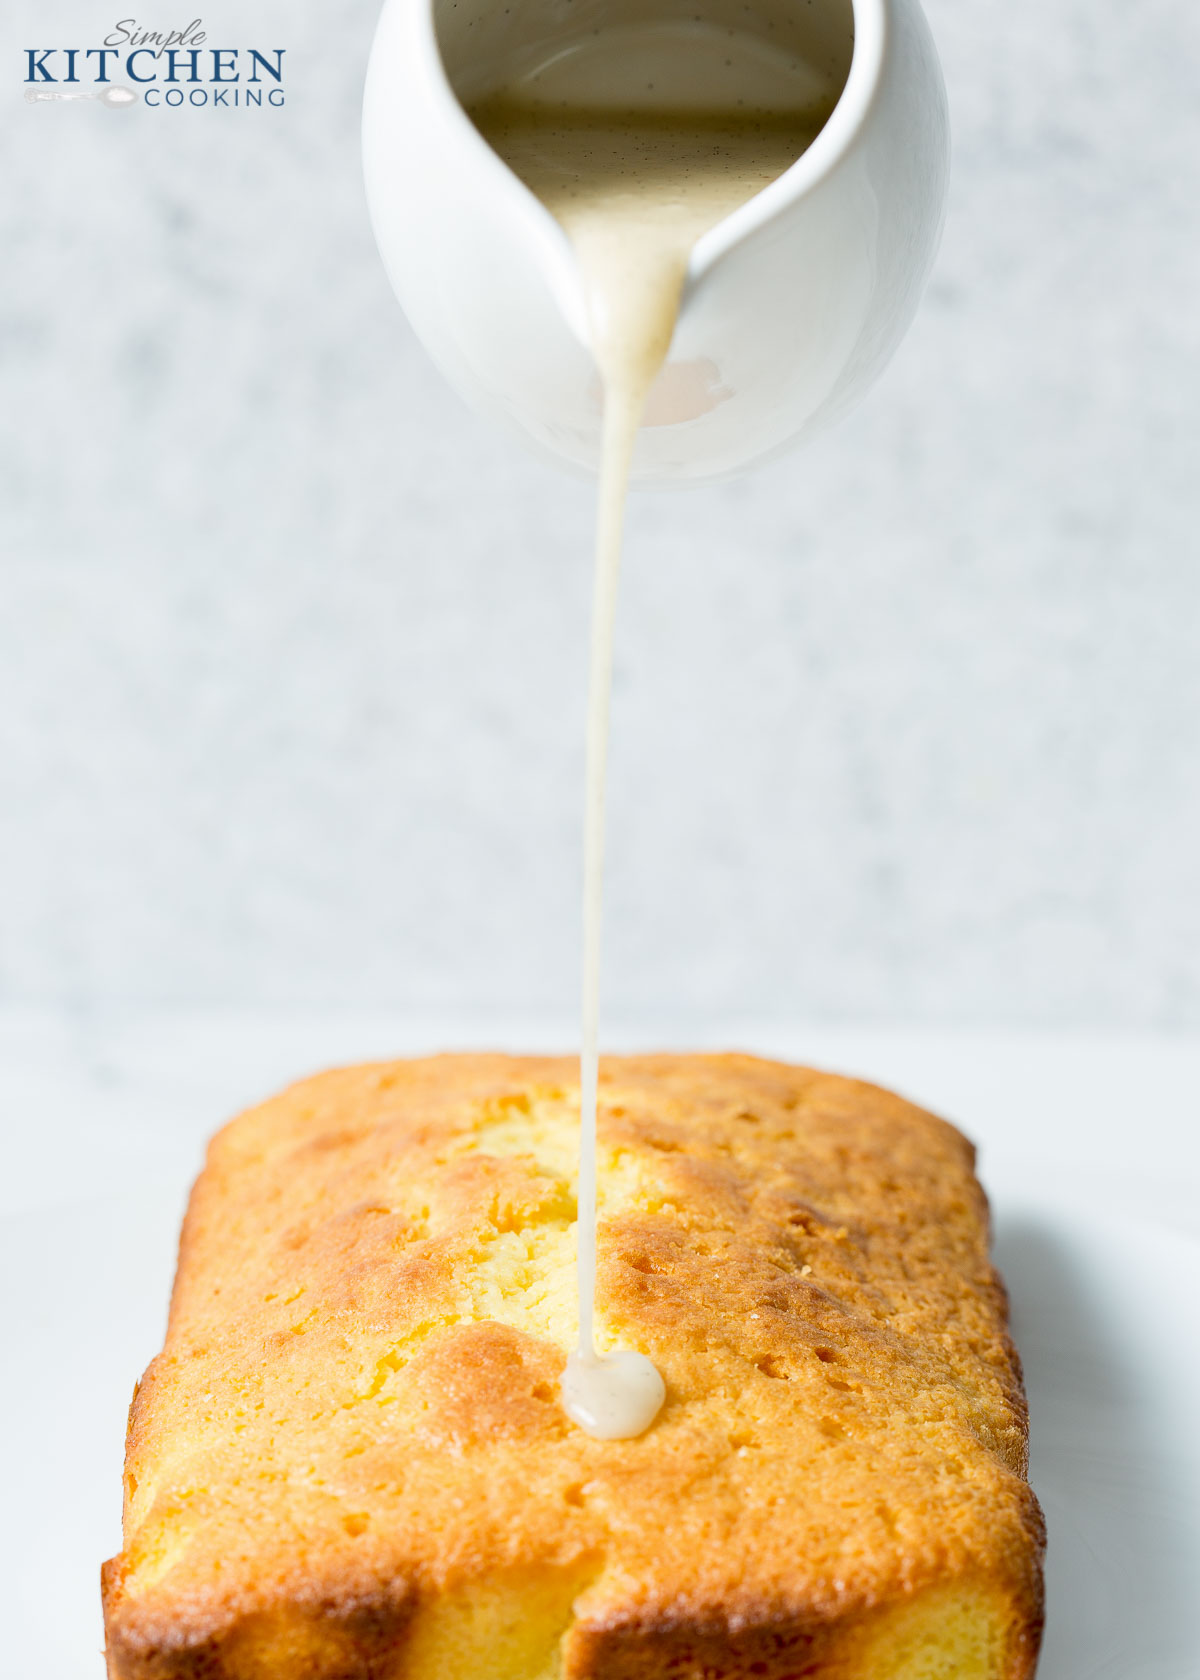 Drizzling the drizzle on the lemon drizzle cake